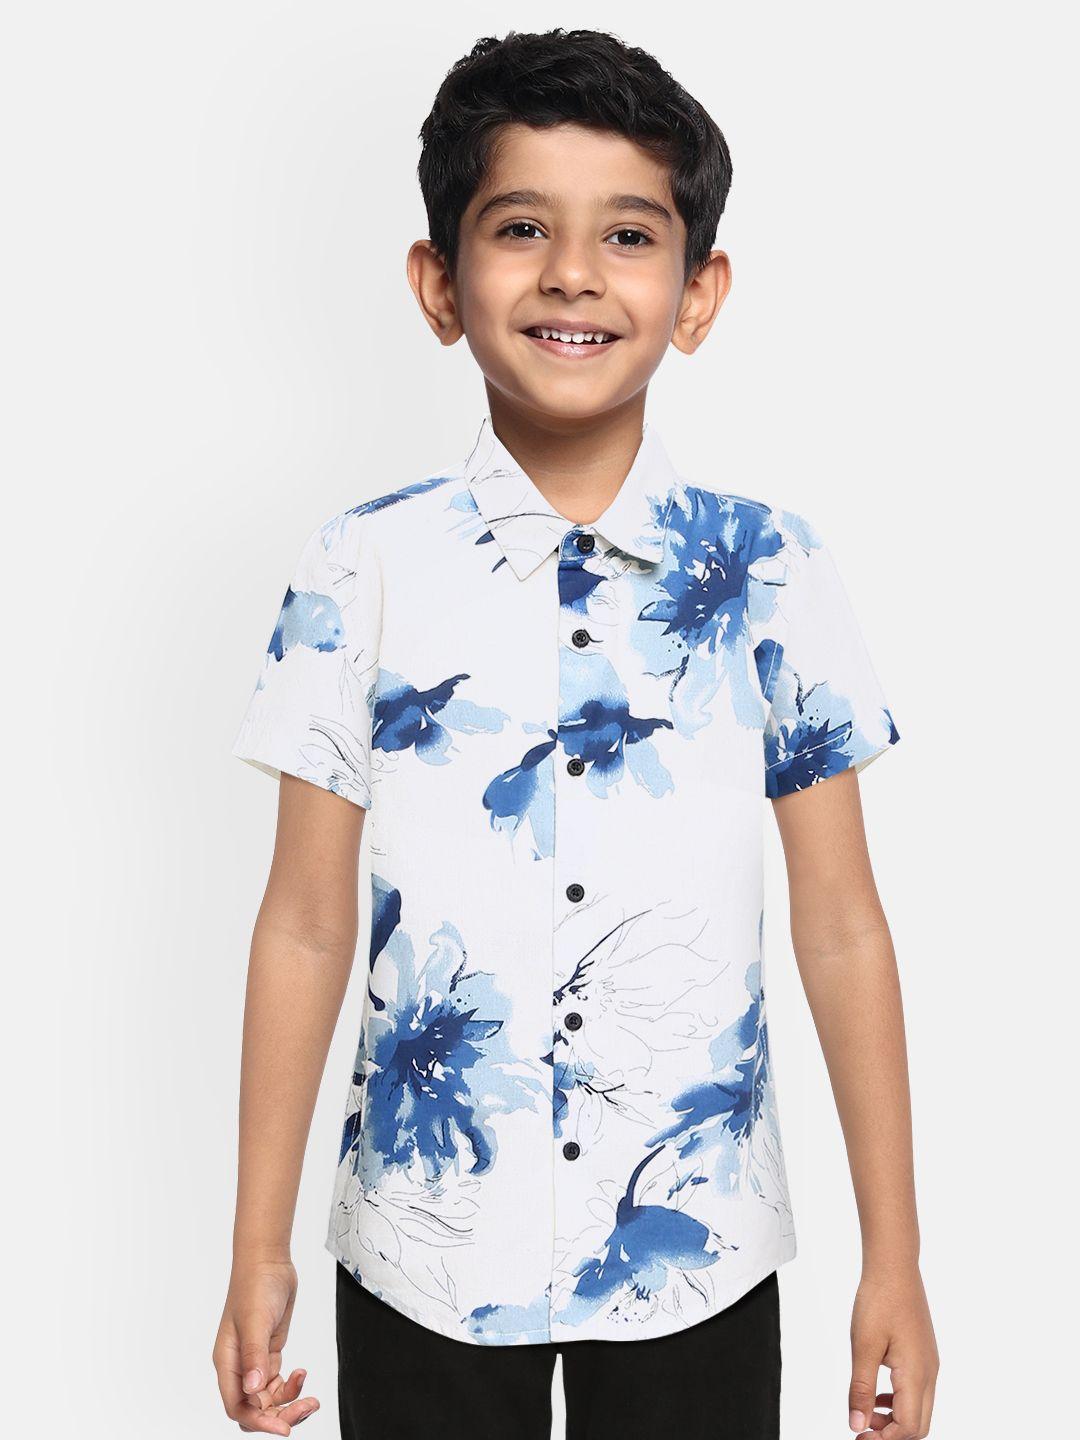 Bene Kleed Boys Off-White Slim Fit N9 Silver Anti-Microbial Cotton Printed Casual Shirt